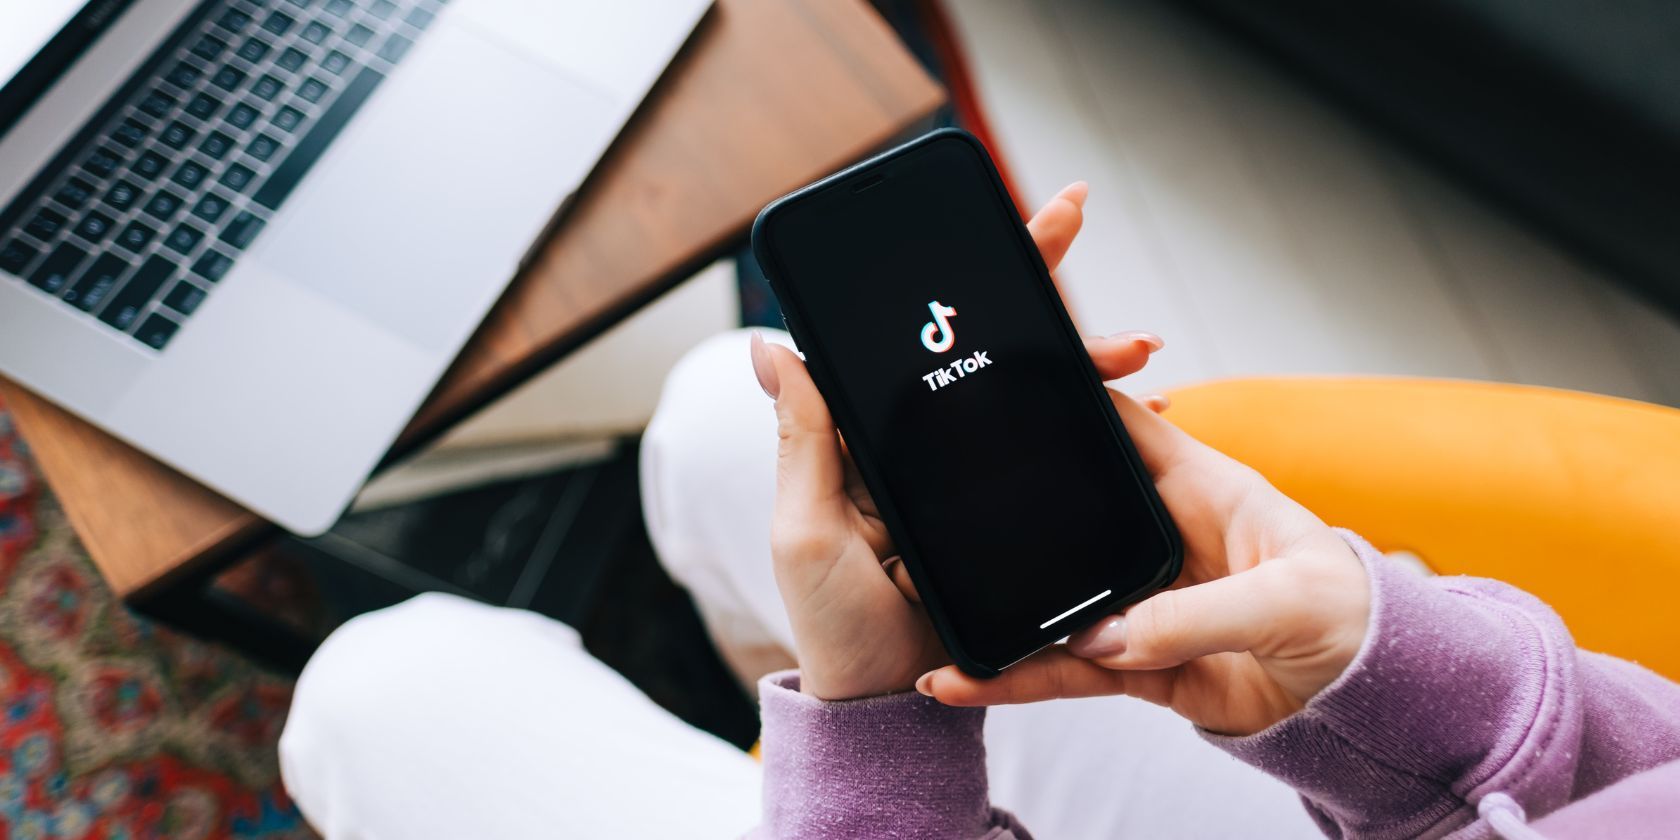 a woman holding a phone with the tiktok logo